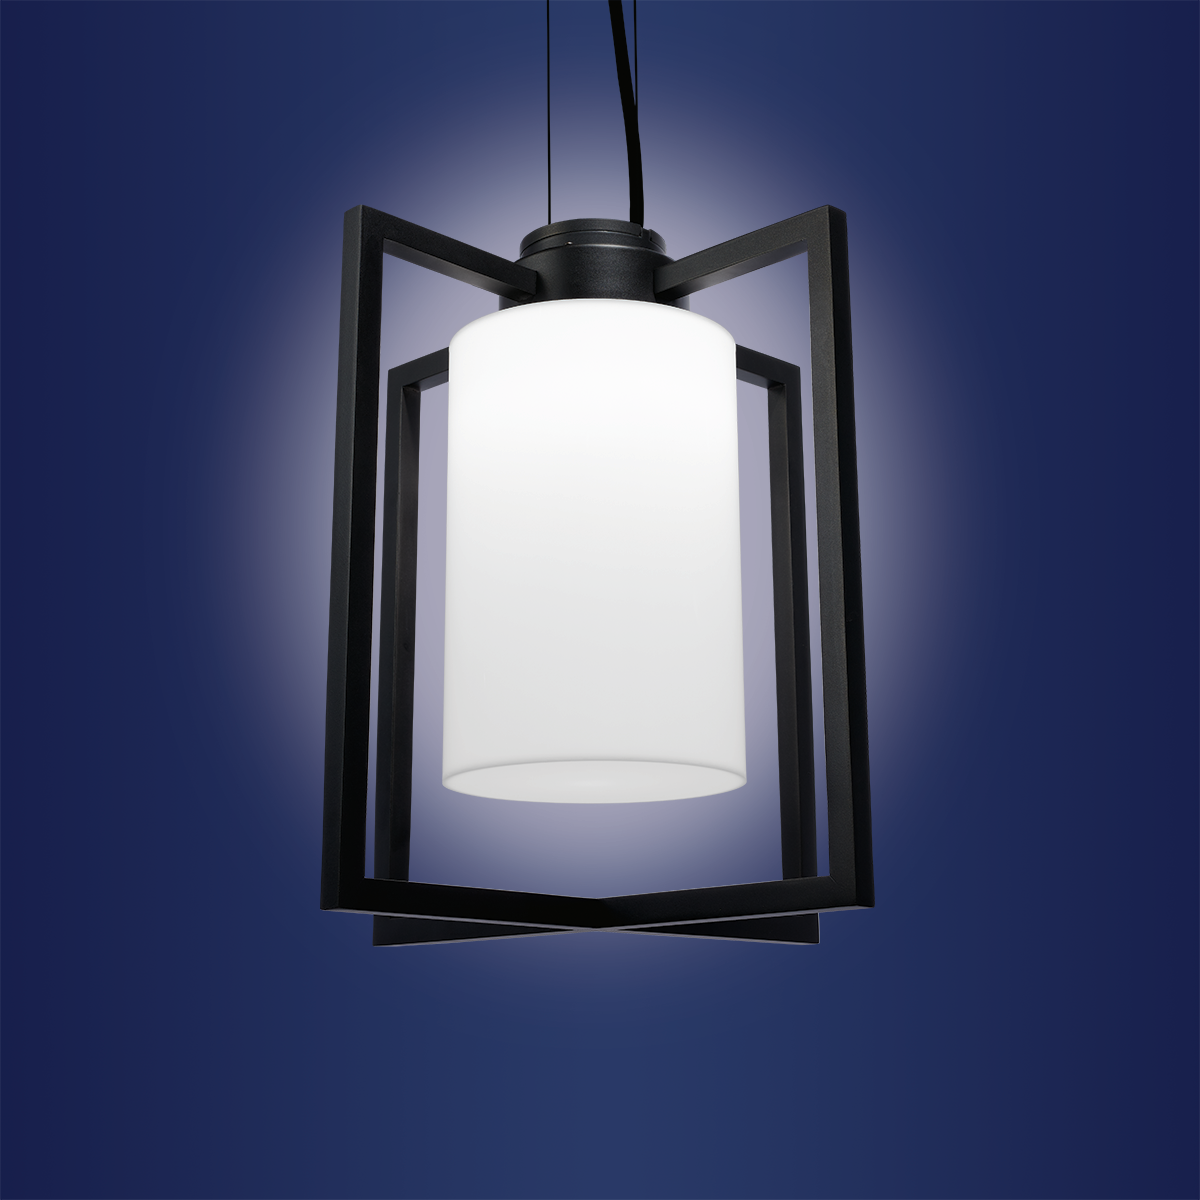 Catenary hung outdoor pendant light with dark outside at night